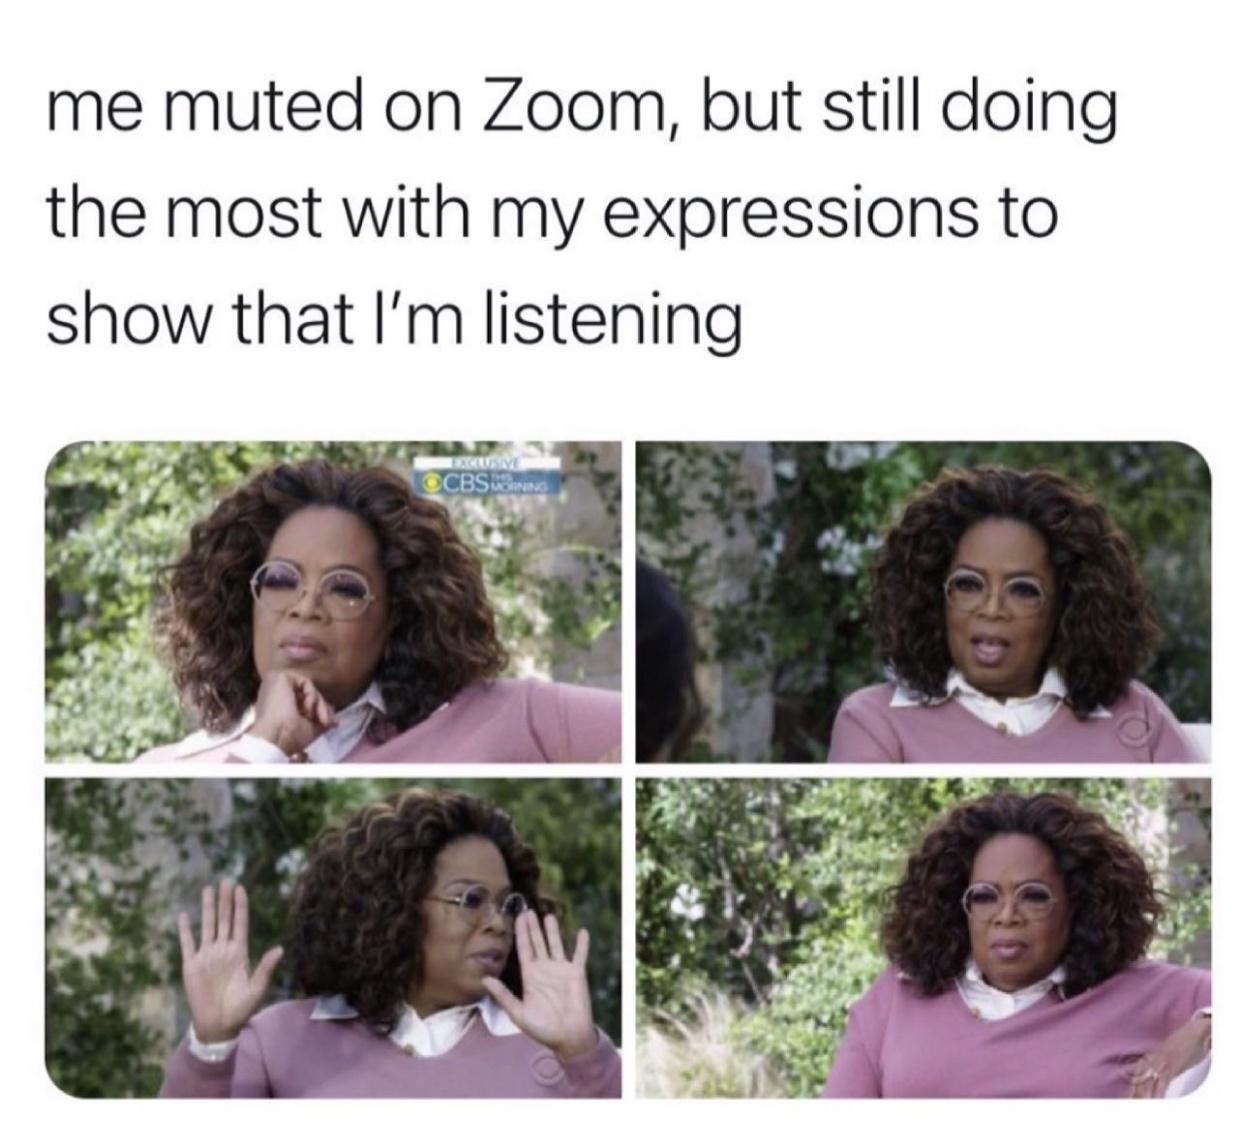 awesome pics and funny memes - human - me muted on Zoom, but still doing the most with my expressions to show that I'm listening Ocbsw